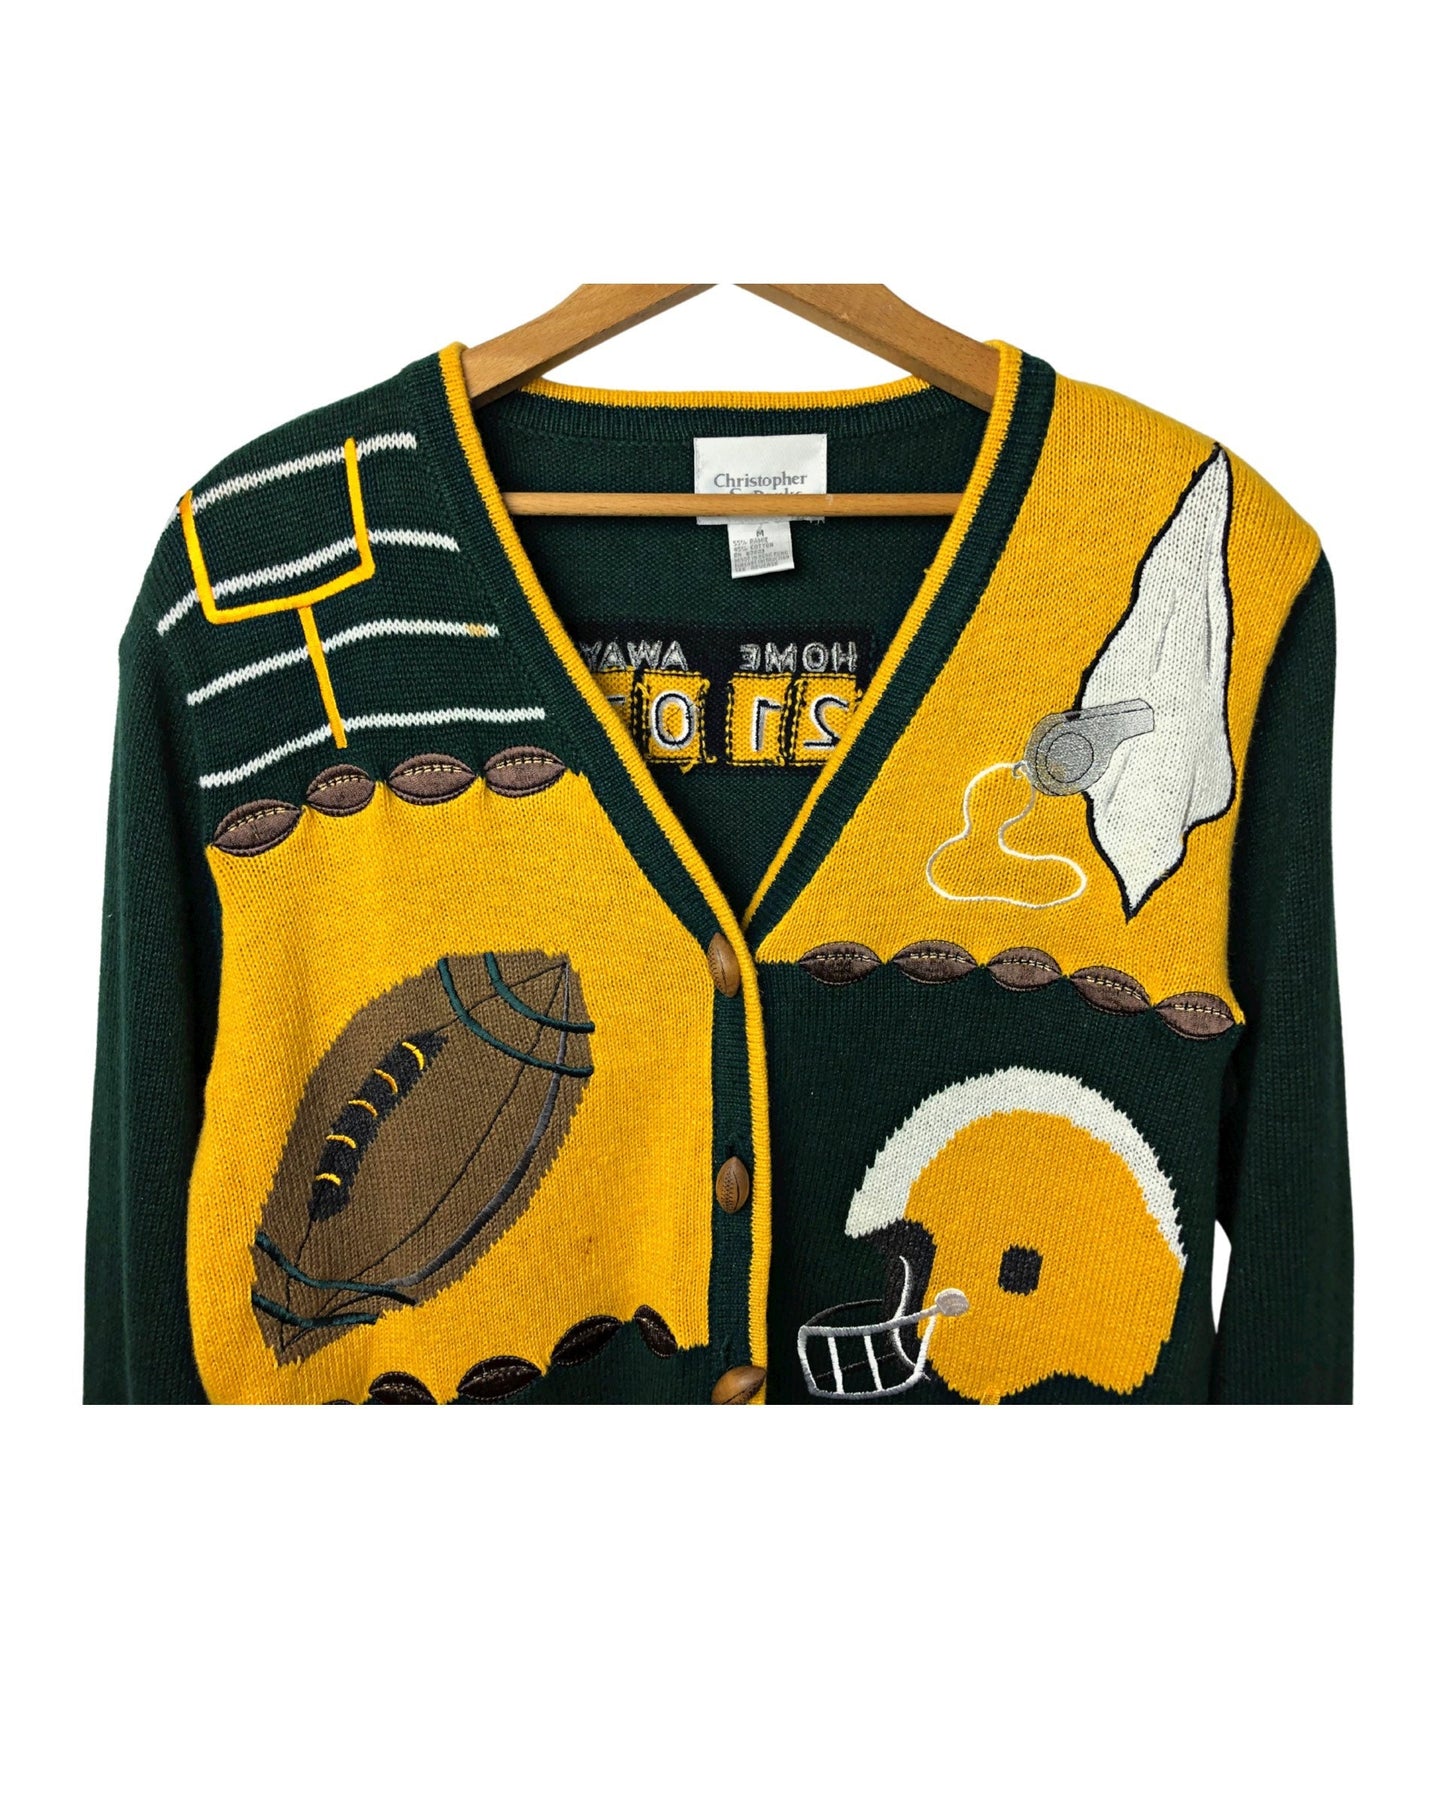 Vintage 90’s Green Bay Packers Football Button Field Goal Flag Chunky Cardigan Sweater Size Medium